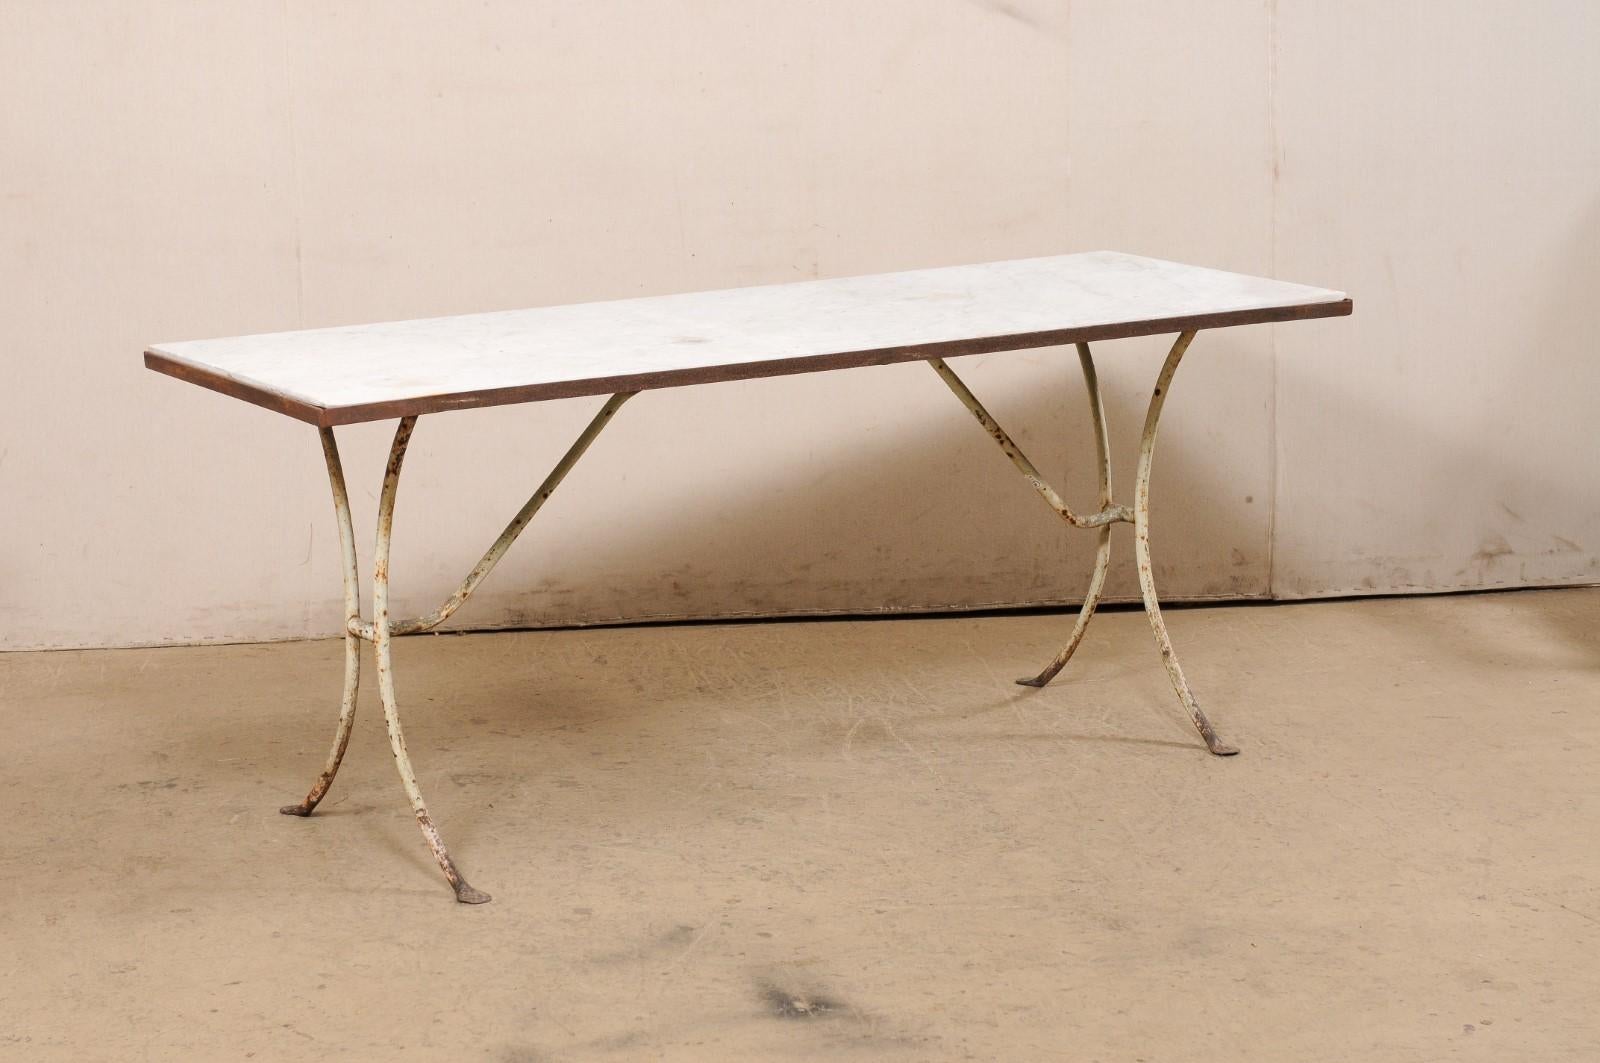 A French marble top table on iron base from the 19th century. This antique table from France features a rectangular-shaped marble top which is recessed into an iron frame and raised upon iron legs which is comprised of a pair of inverted